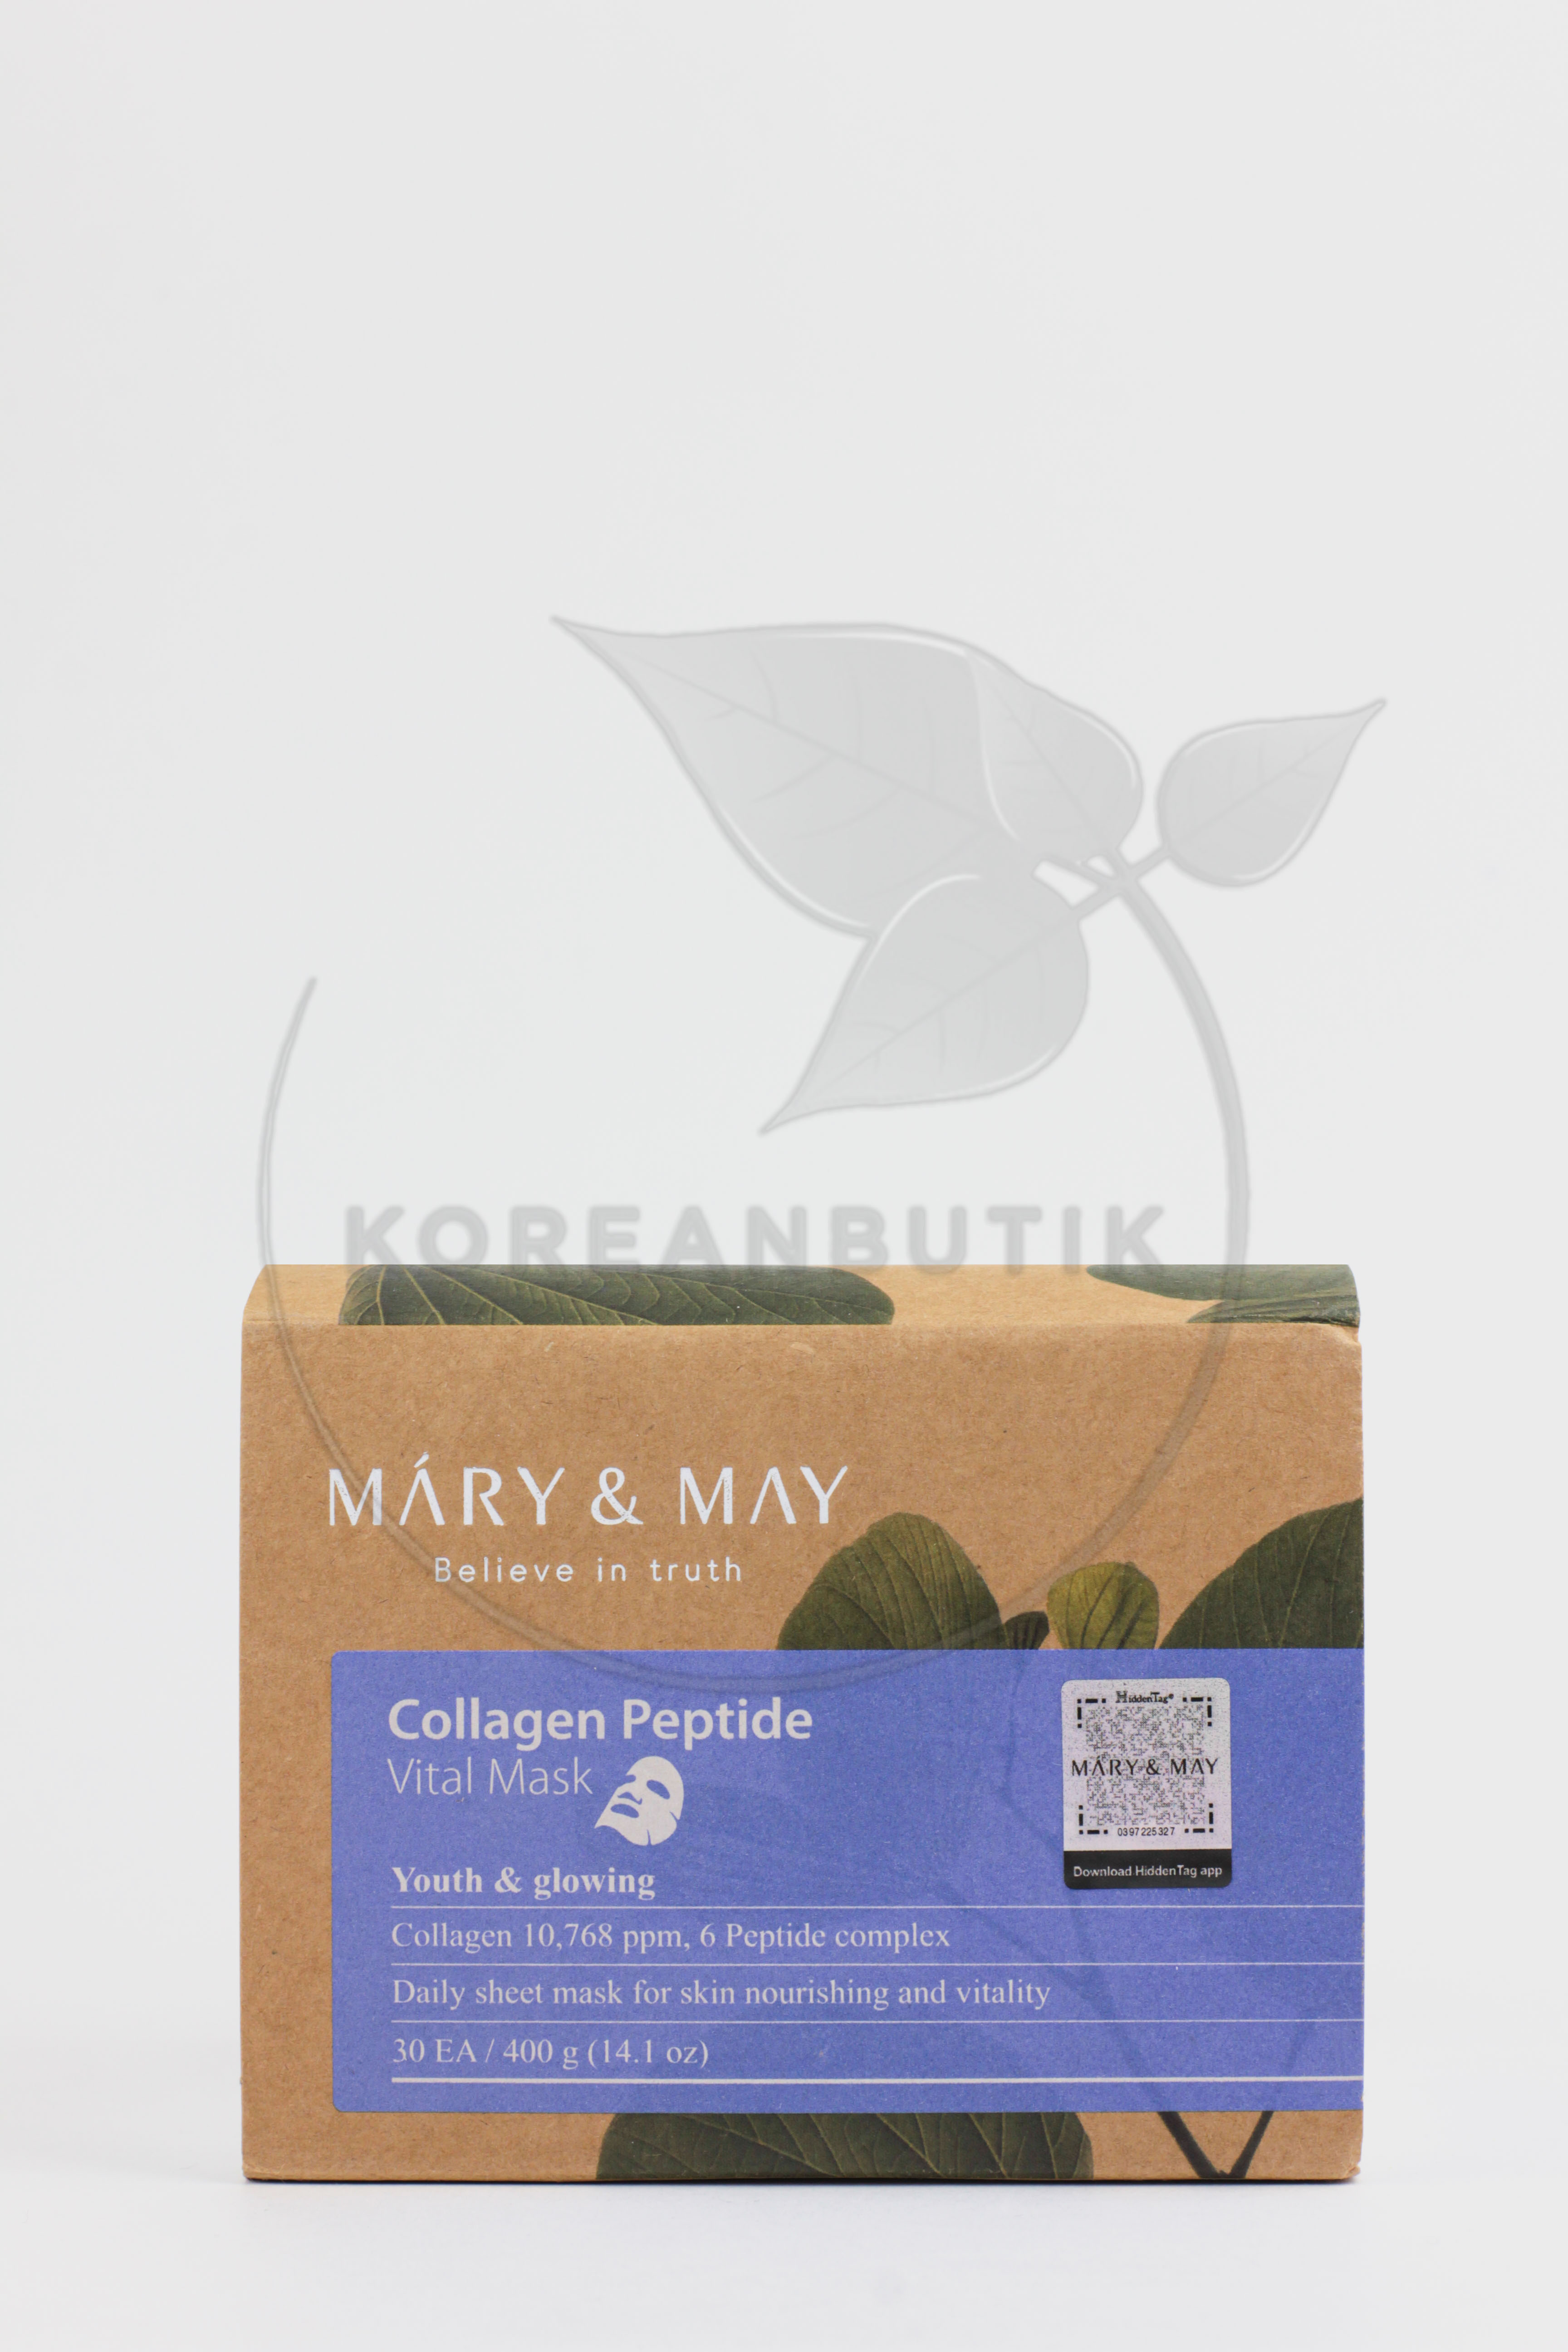  Mary&May Collagen Peptide Vital Mask 30ea 